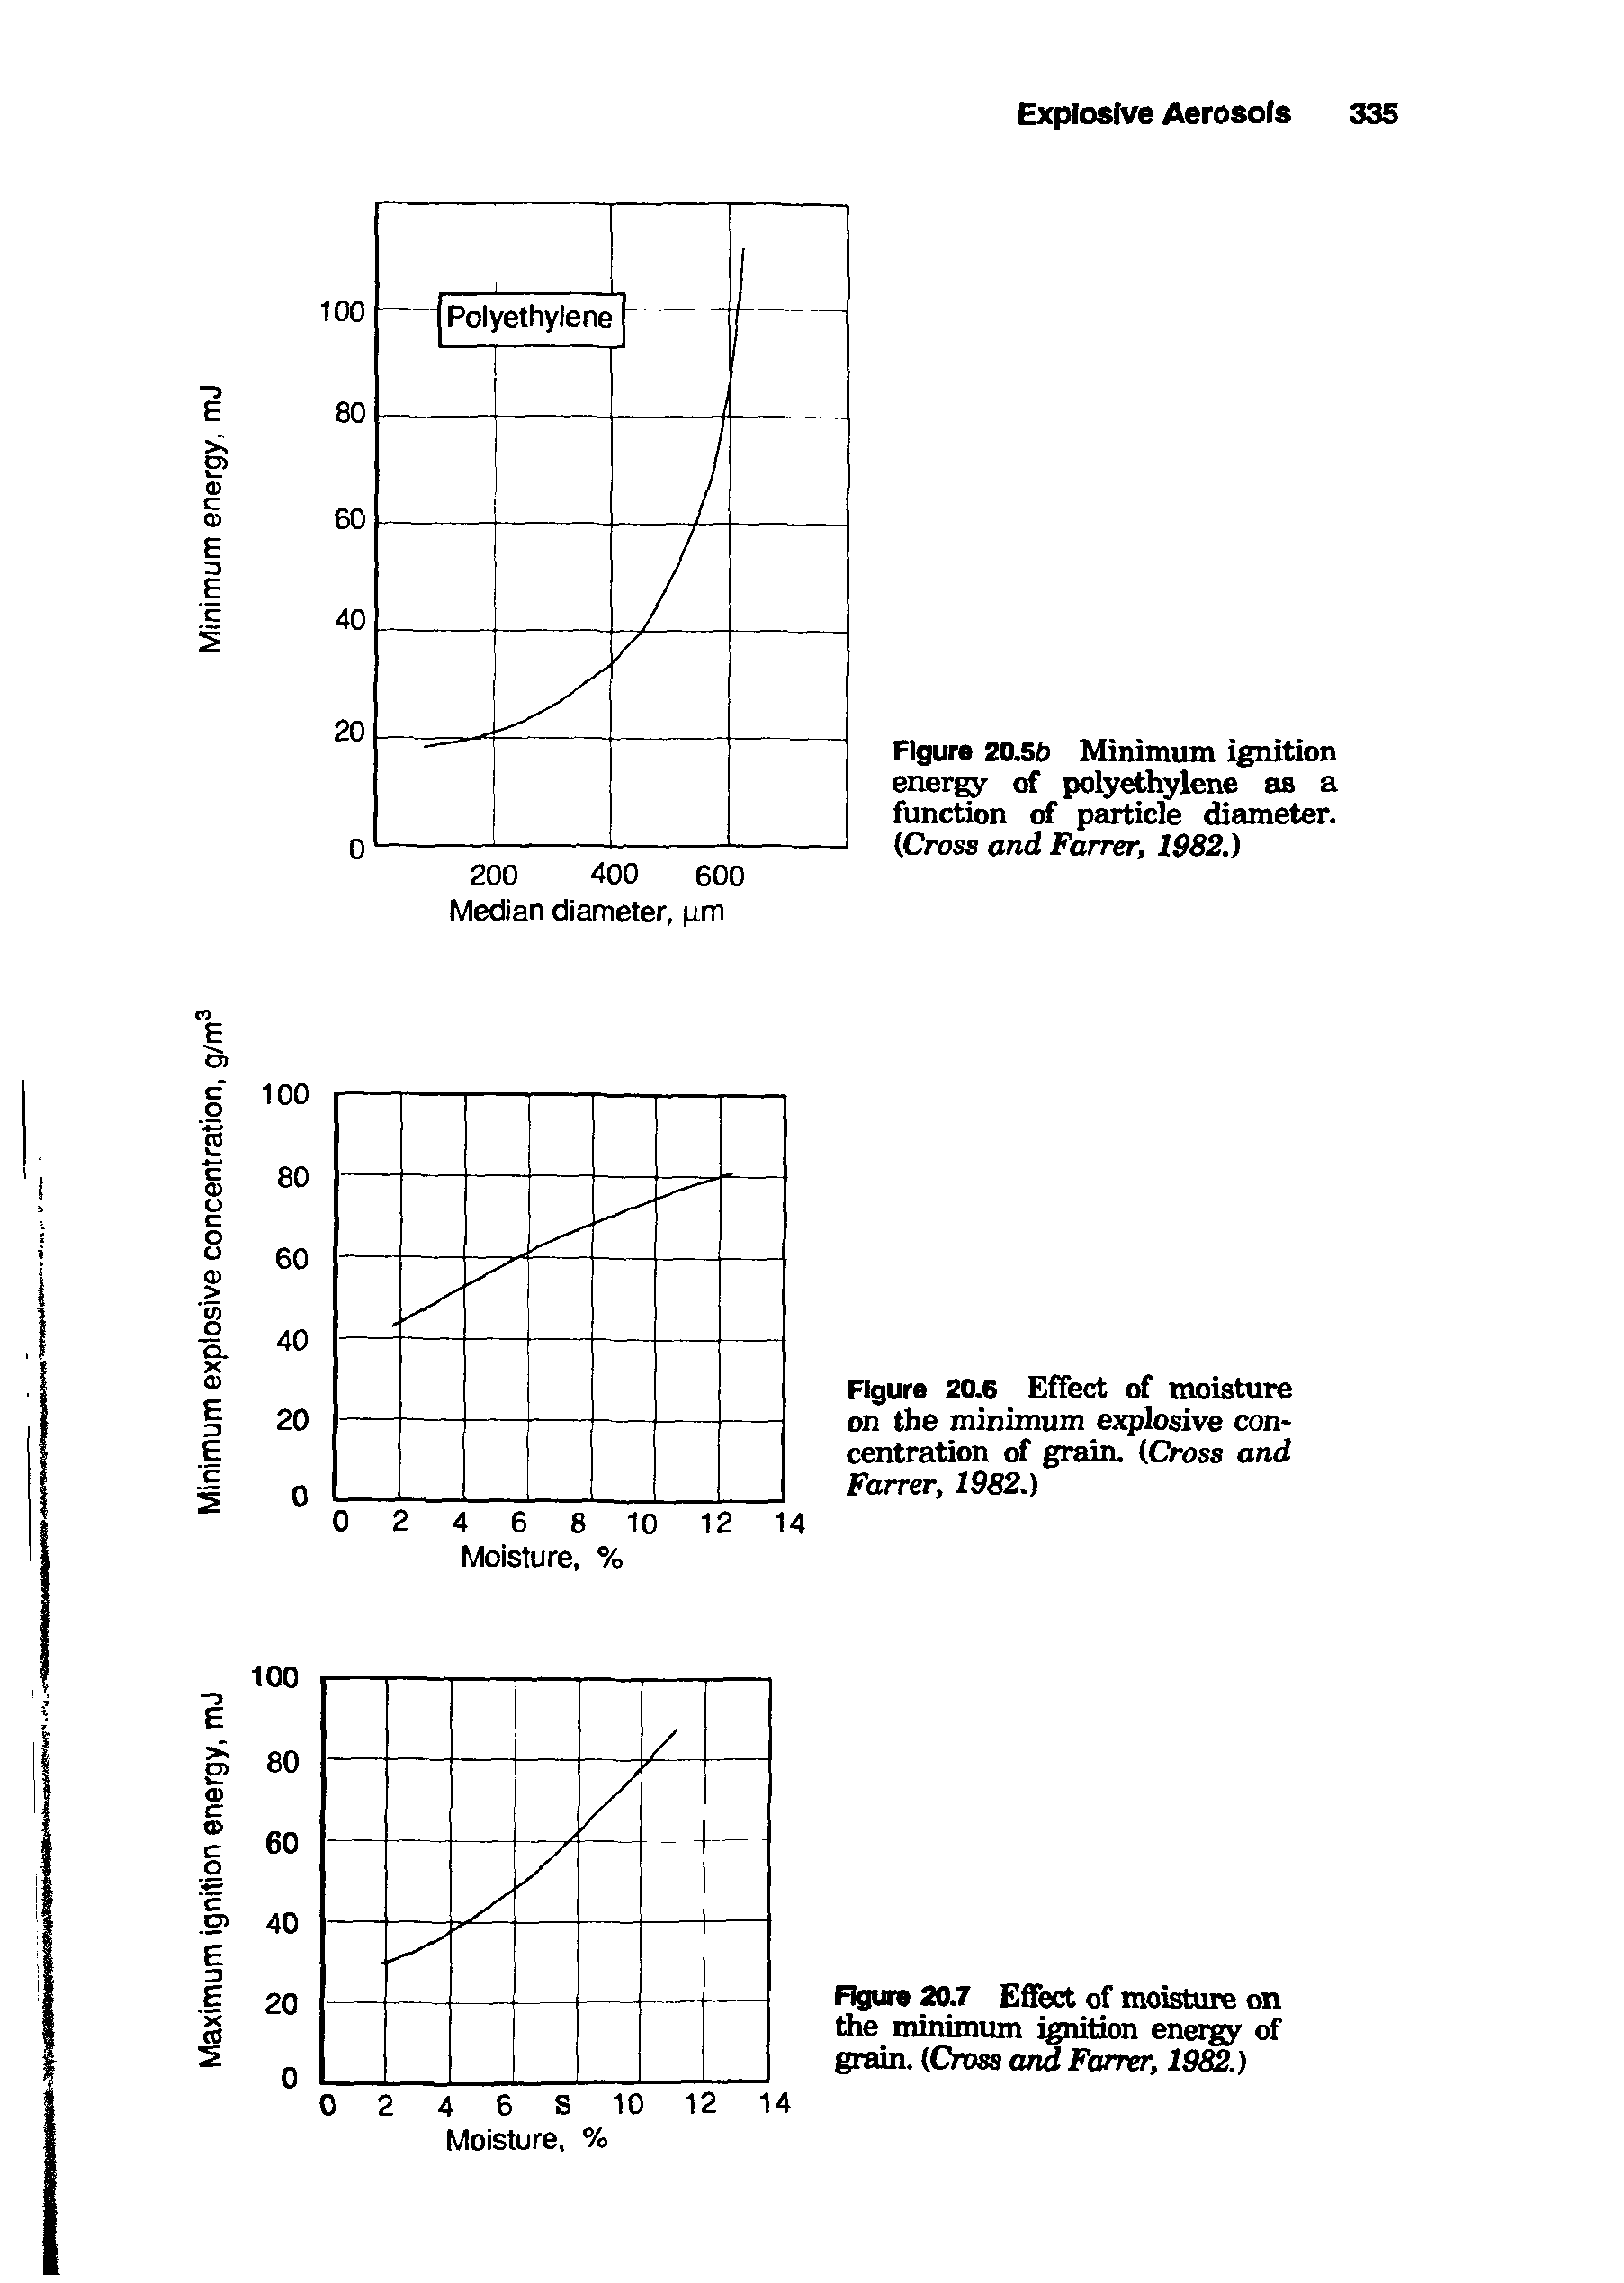 Figure 20.6 Effect of moisture on the minimum explosive concentration of grain. (Cross and Farrer, 1982.)...